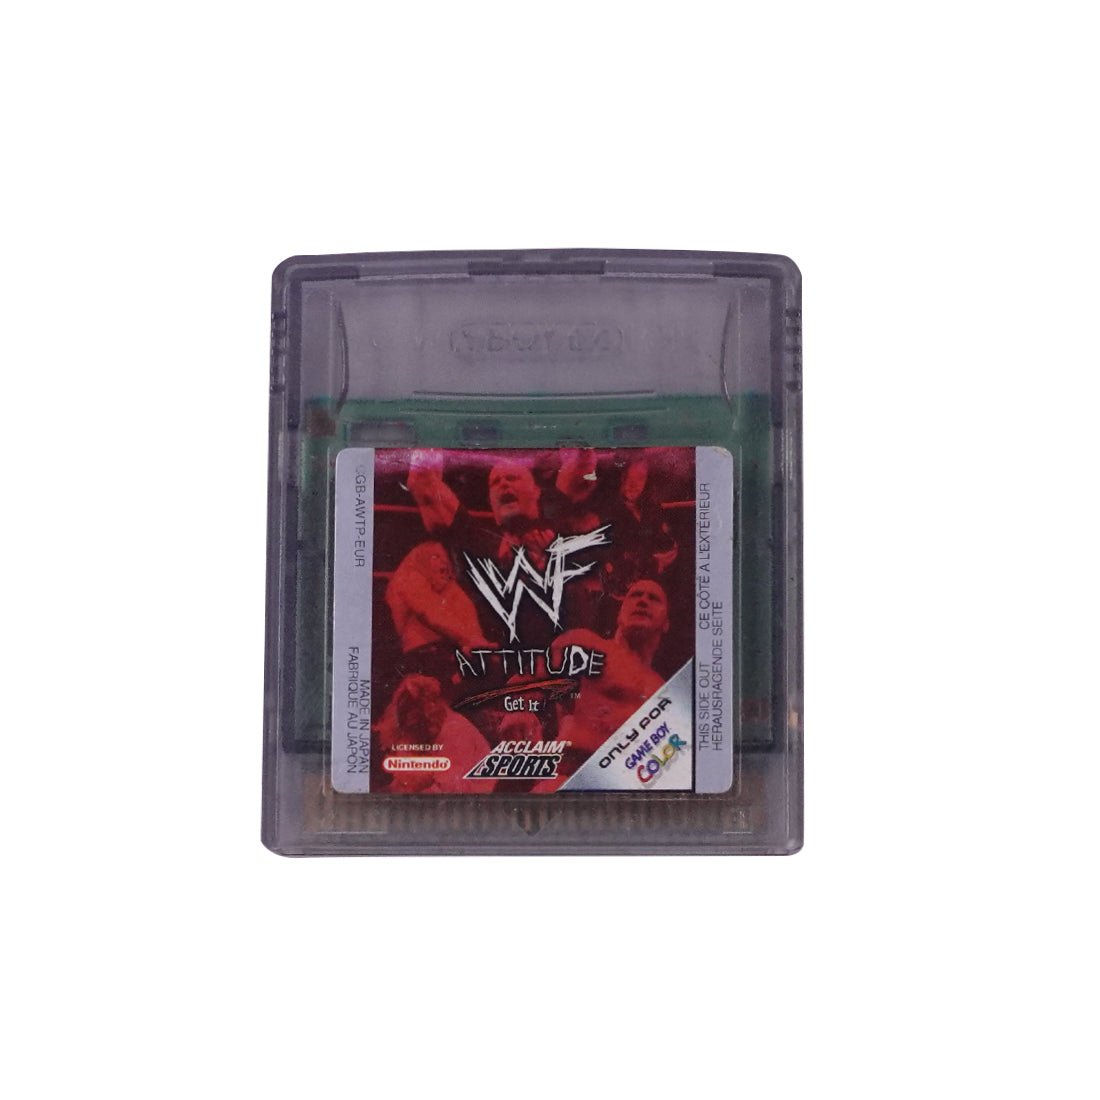 (Pre-Owned) WF Attitude: Get It - Gameboy Color - Store 974 | ستور ٩٧٤